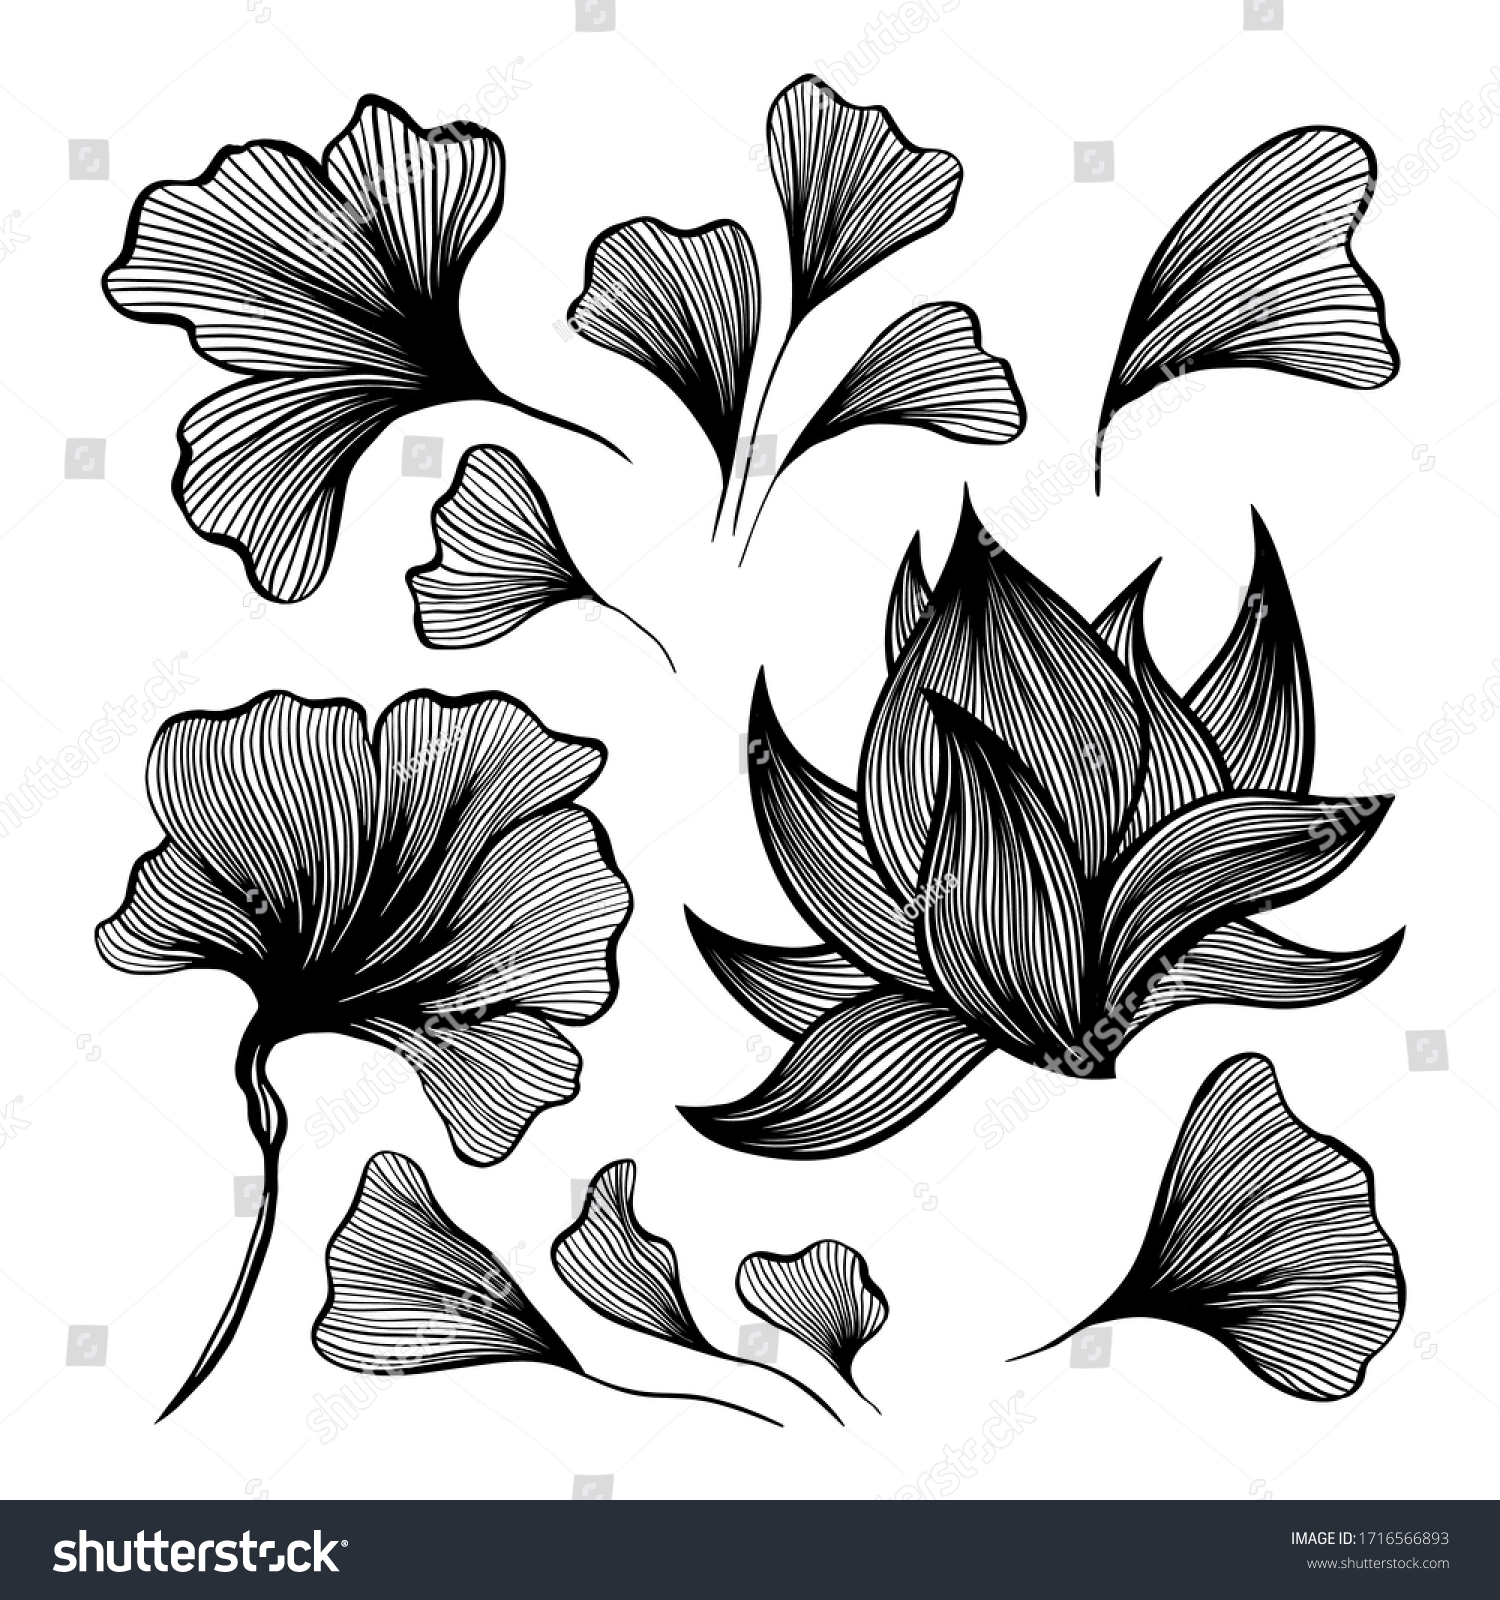 SVG of Abstract waves black and white line art decoration set for wallpaper and wall art design. Use for laser cutting. Modern contour drawign elements floral collection svg